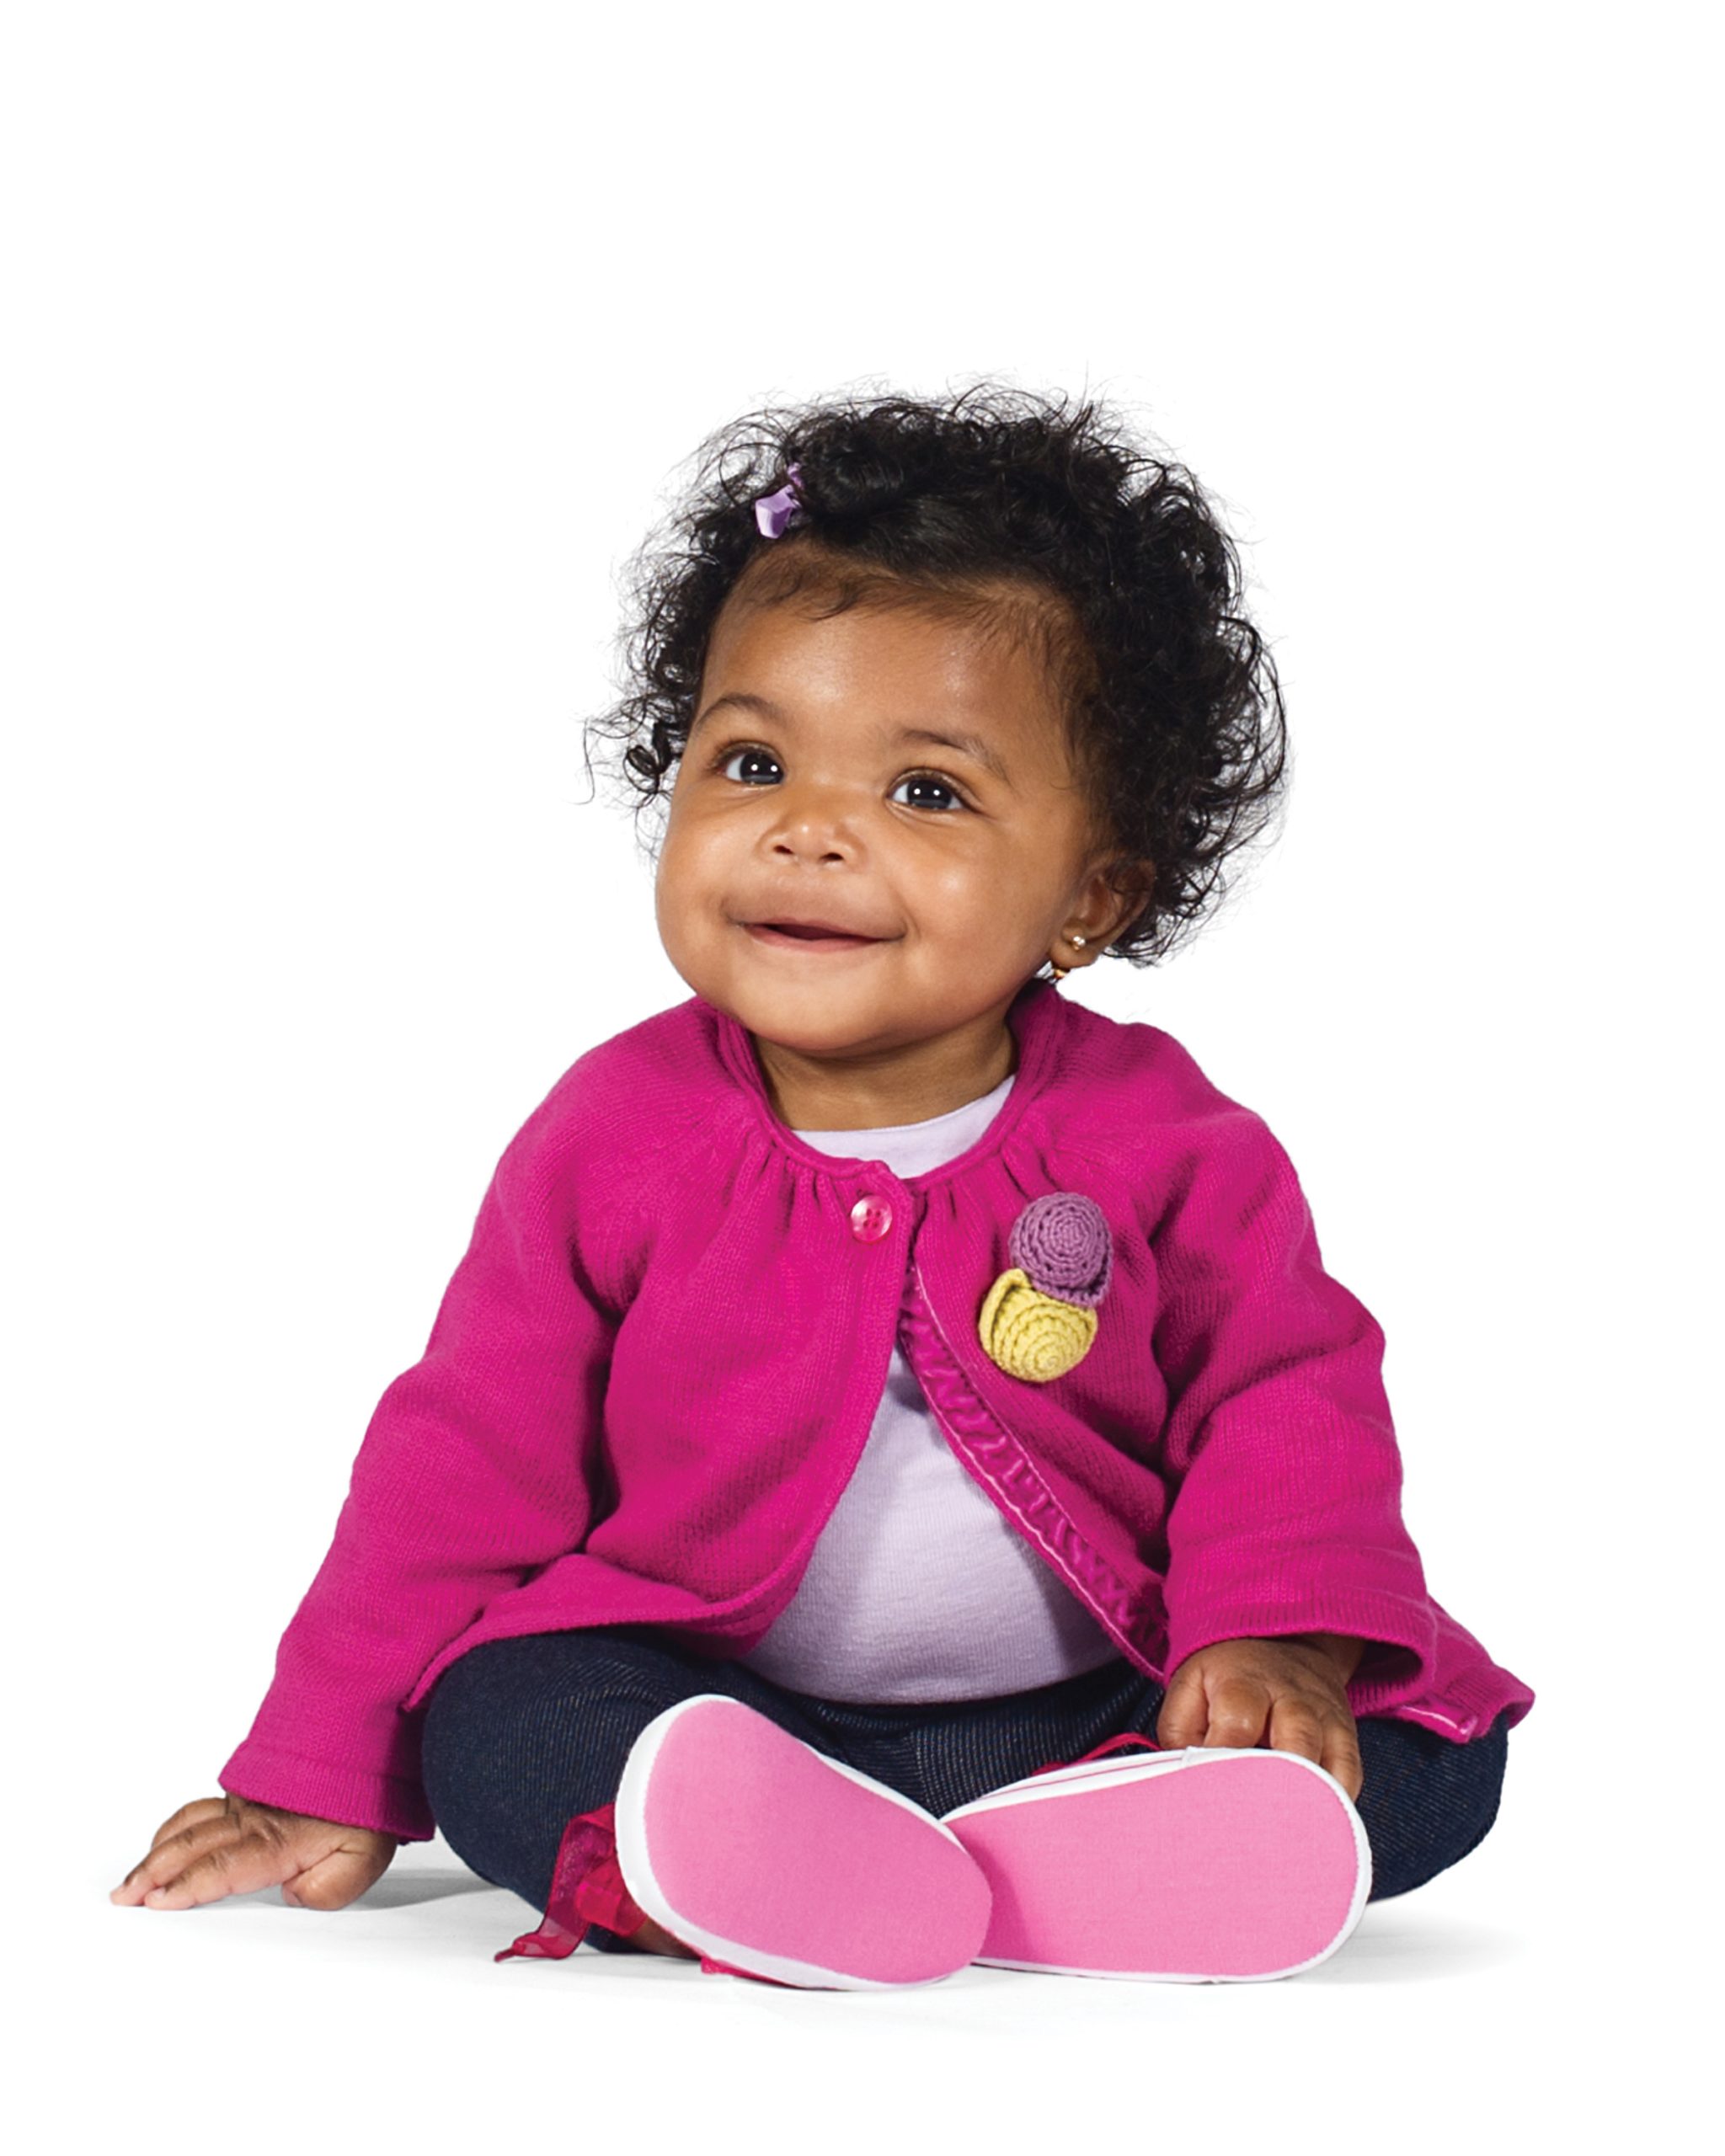 Sweet little girl smiling in a pink sweater.